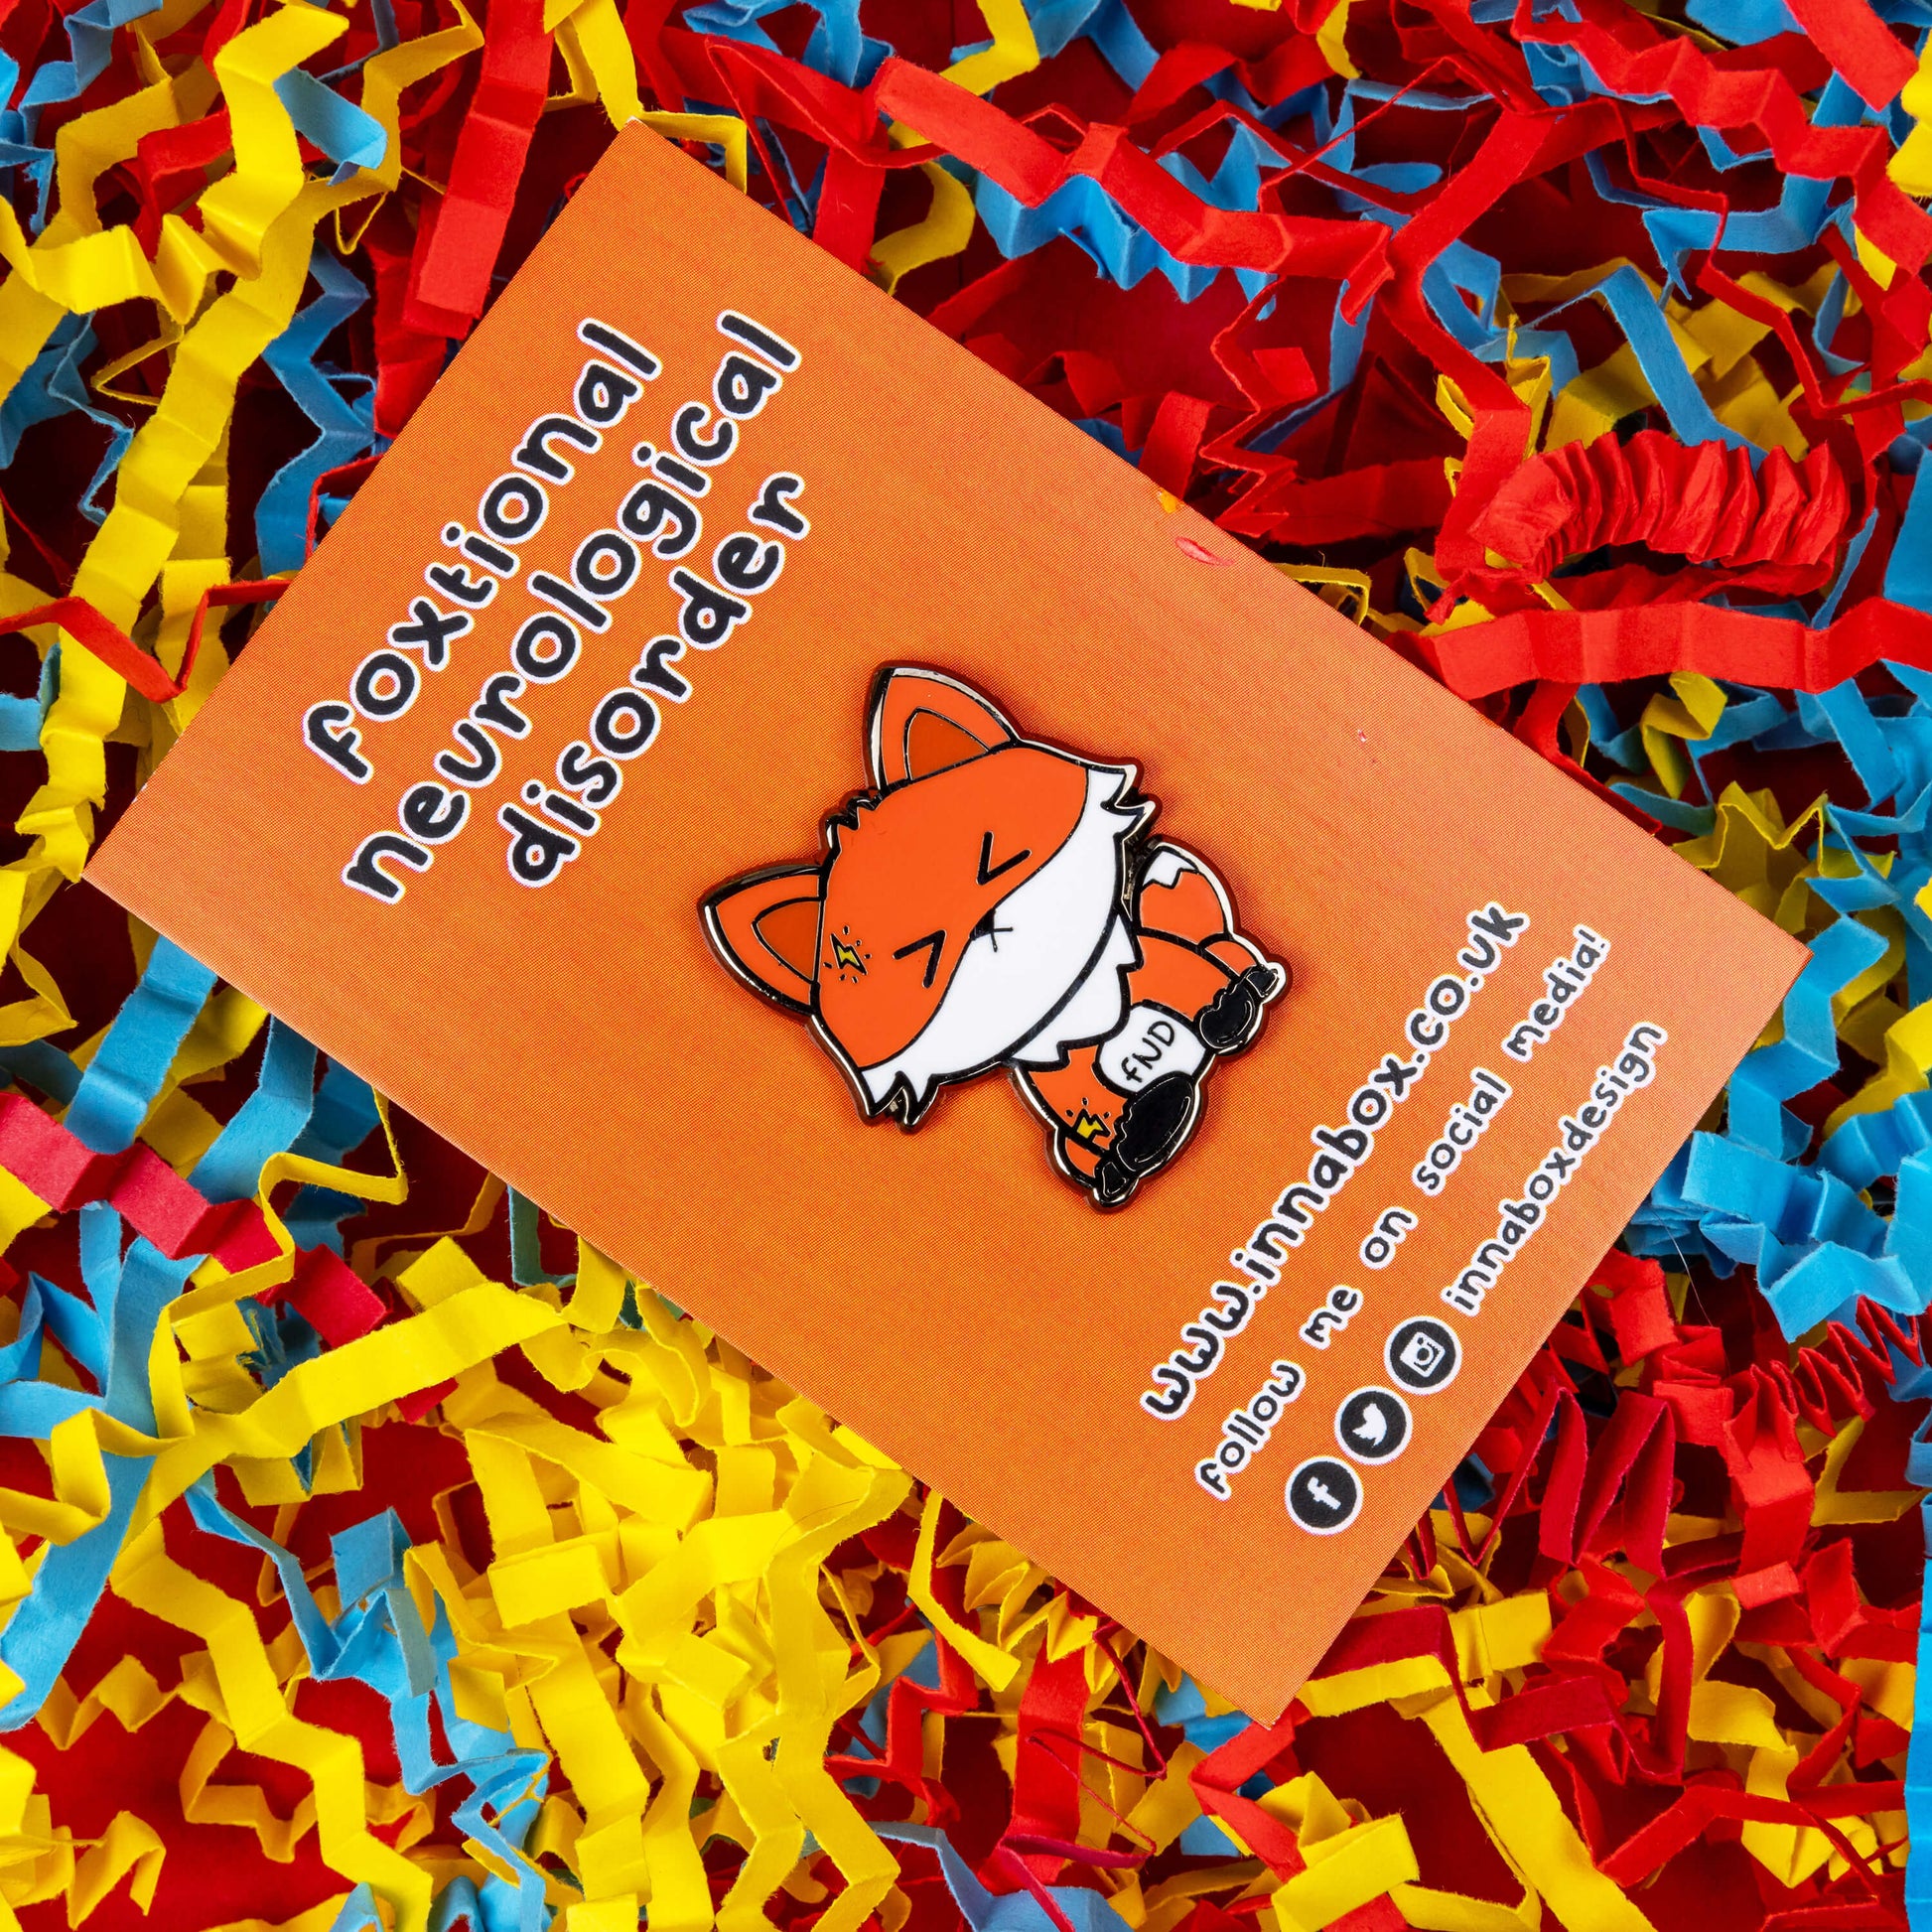 Foxtional Neurological Disorder - Functional Neurological Disorder (FND) Enamel Pin on orange backing card in front of a red, yellow and blue coloured card background. The enamel pin is a fox with a pained expression on its face and yellow lightning illustration on its head and arm. The enamel pin is designed to raise awareness for Functional Neurological Disorder (FND)